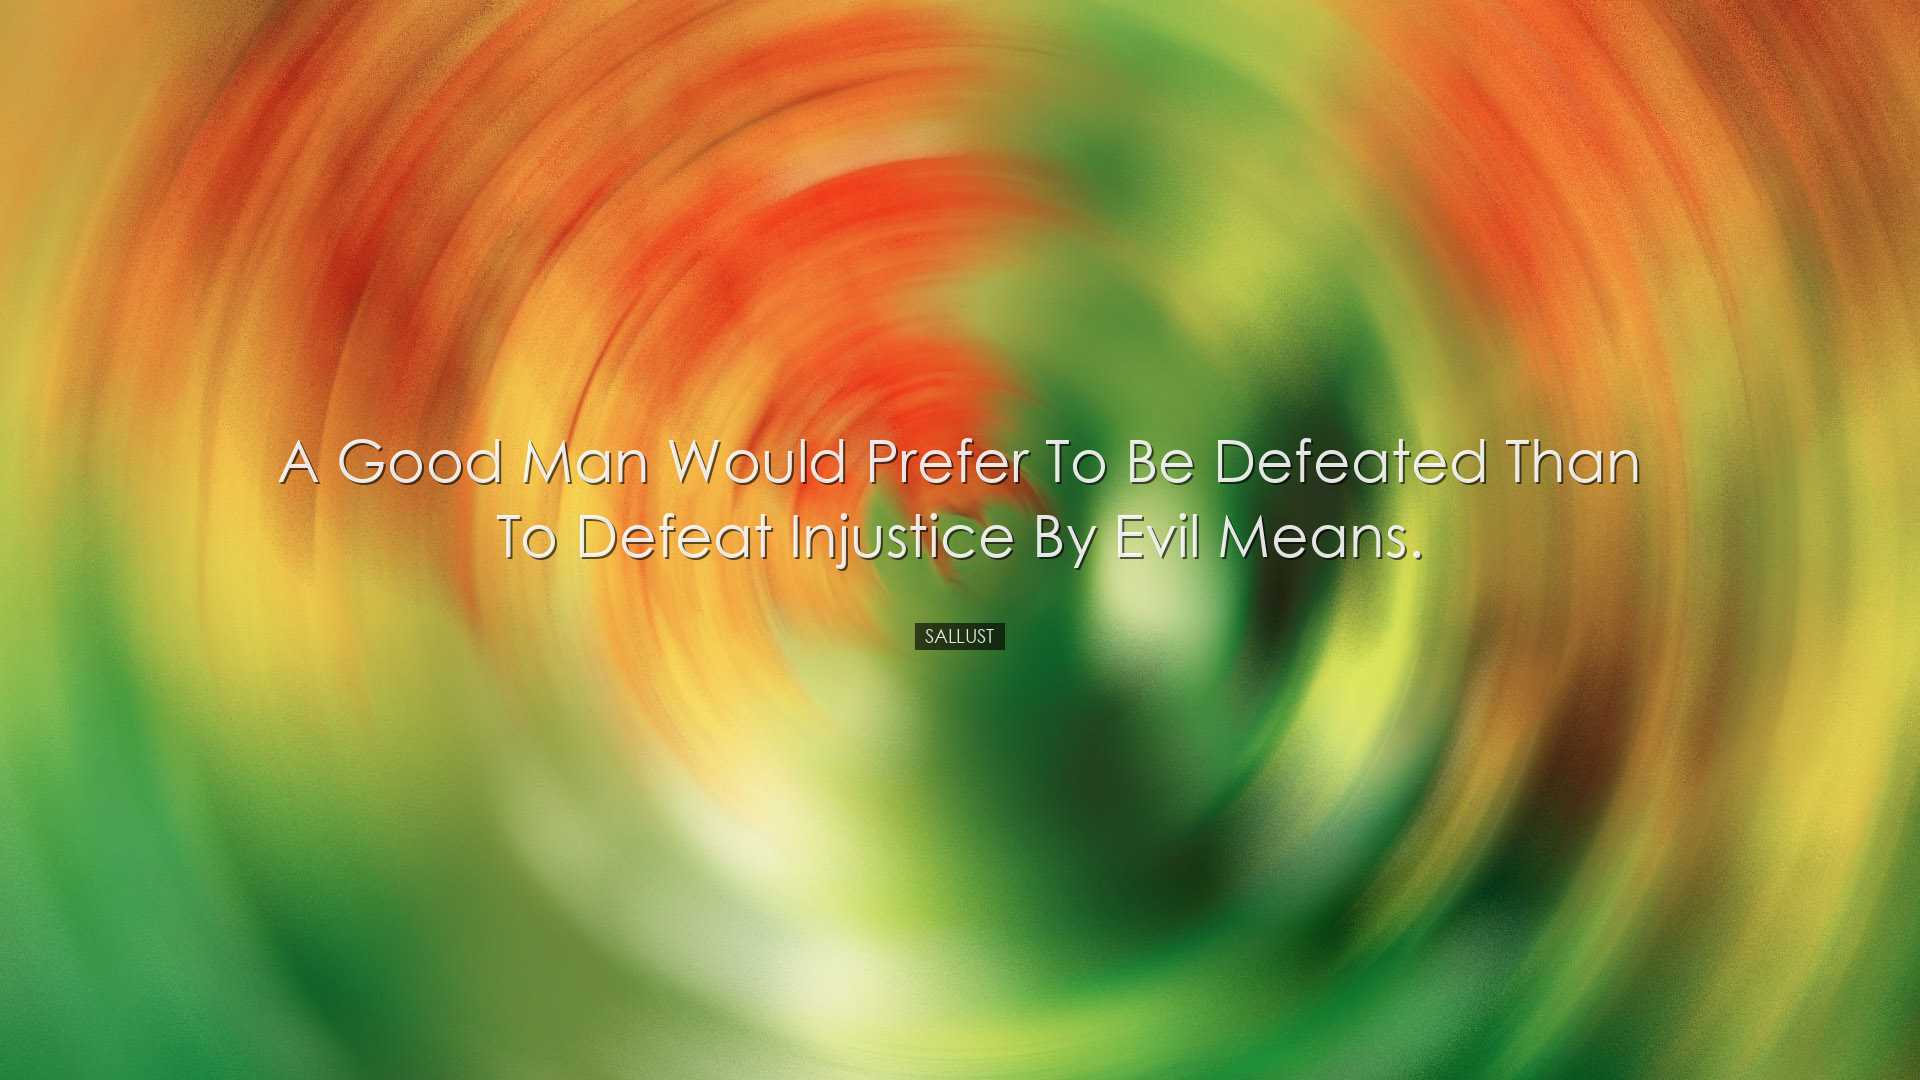 A good man would prefer to be defeated than to defeat injustice by